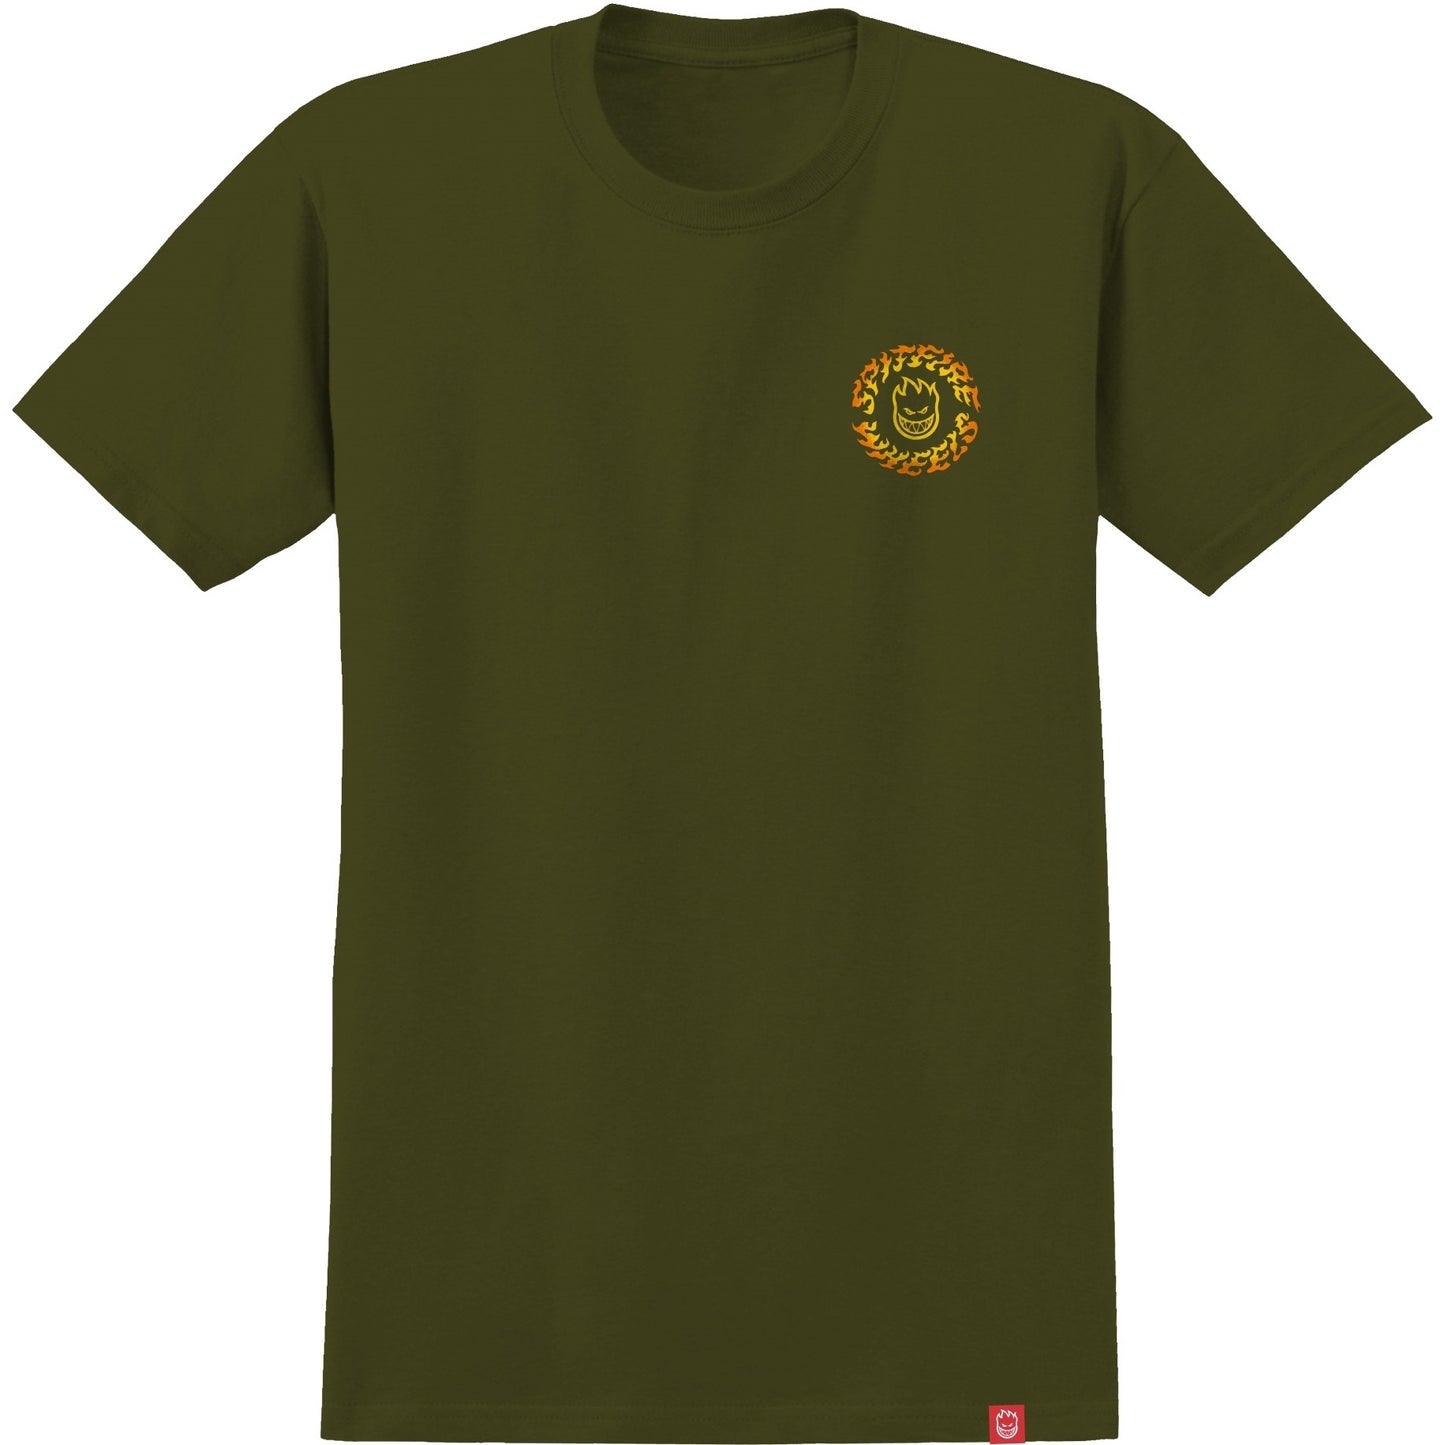 SPITFIRE TORCHED SCRIPT TEE - MILITARY GREEN